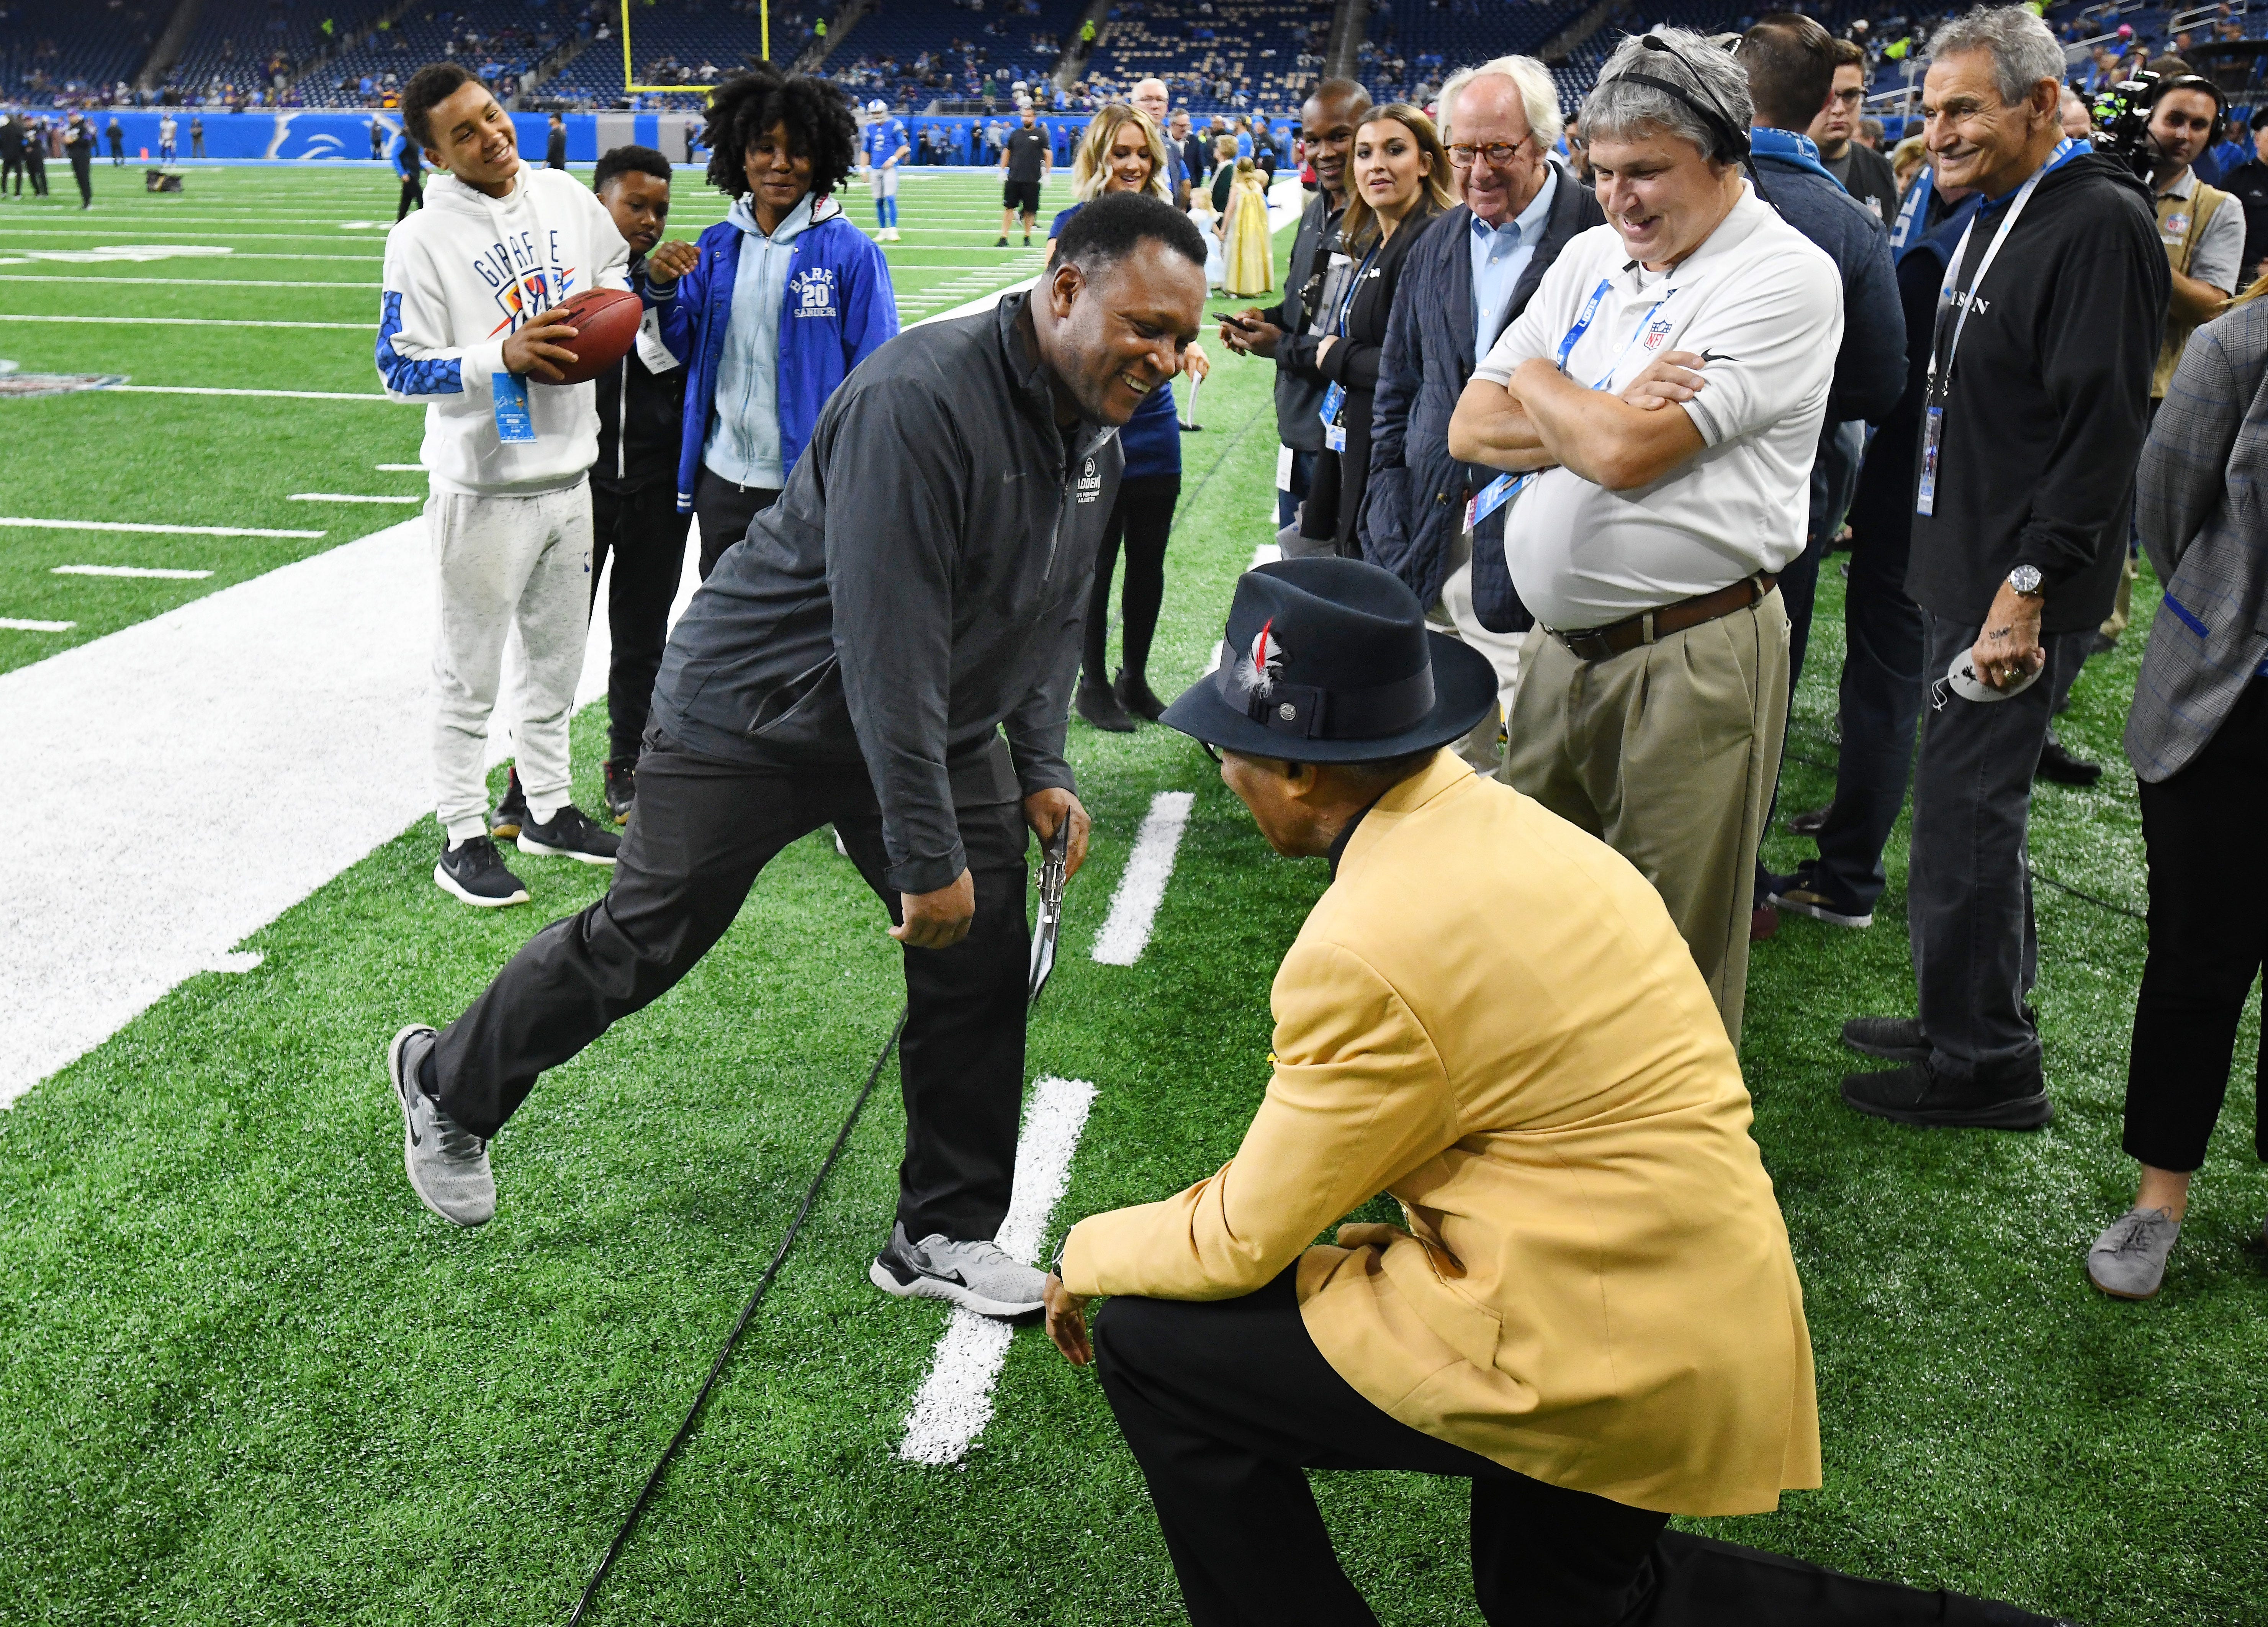 NFL Hall of Fame defensive back Lem Barney takes a knee to NFL Hall of Fame running back Barry Sanders as the two goof around on the sidelines before the Lions take on the Vikings at Ford Field.